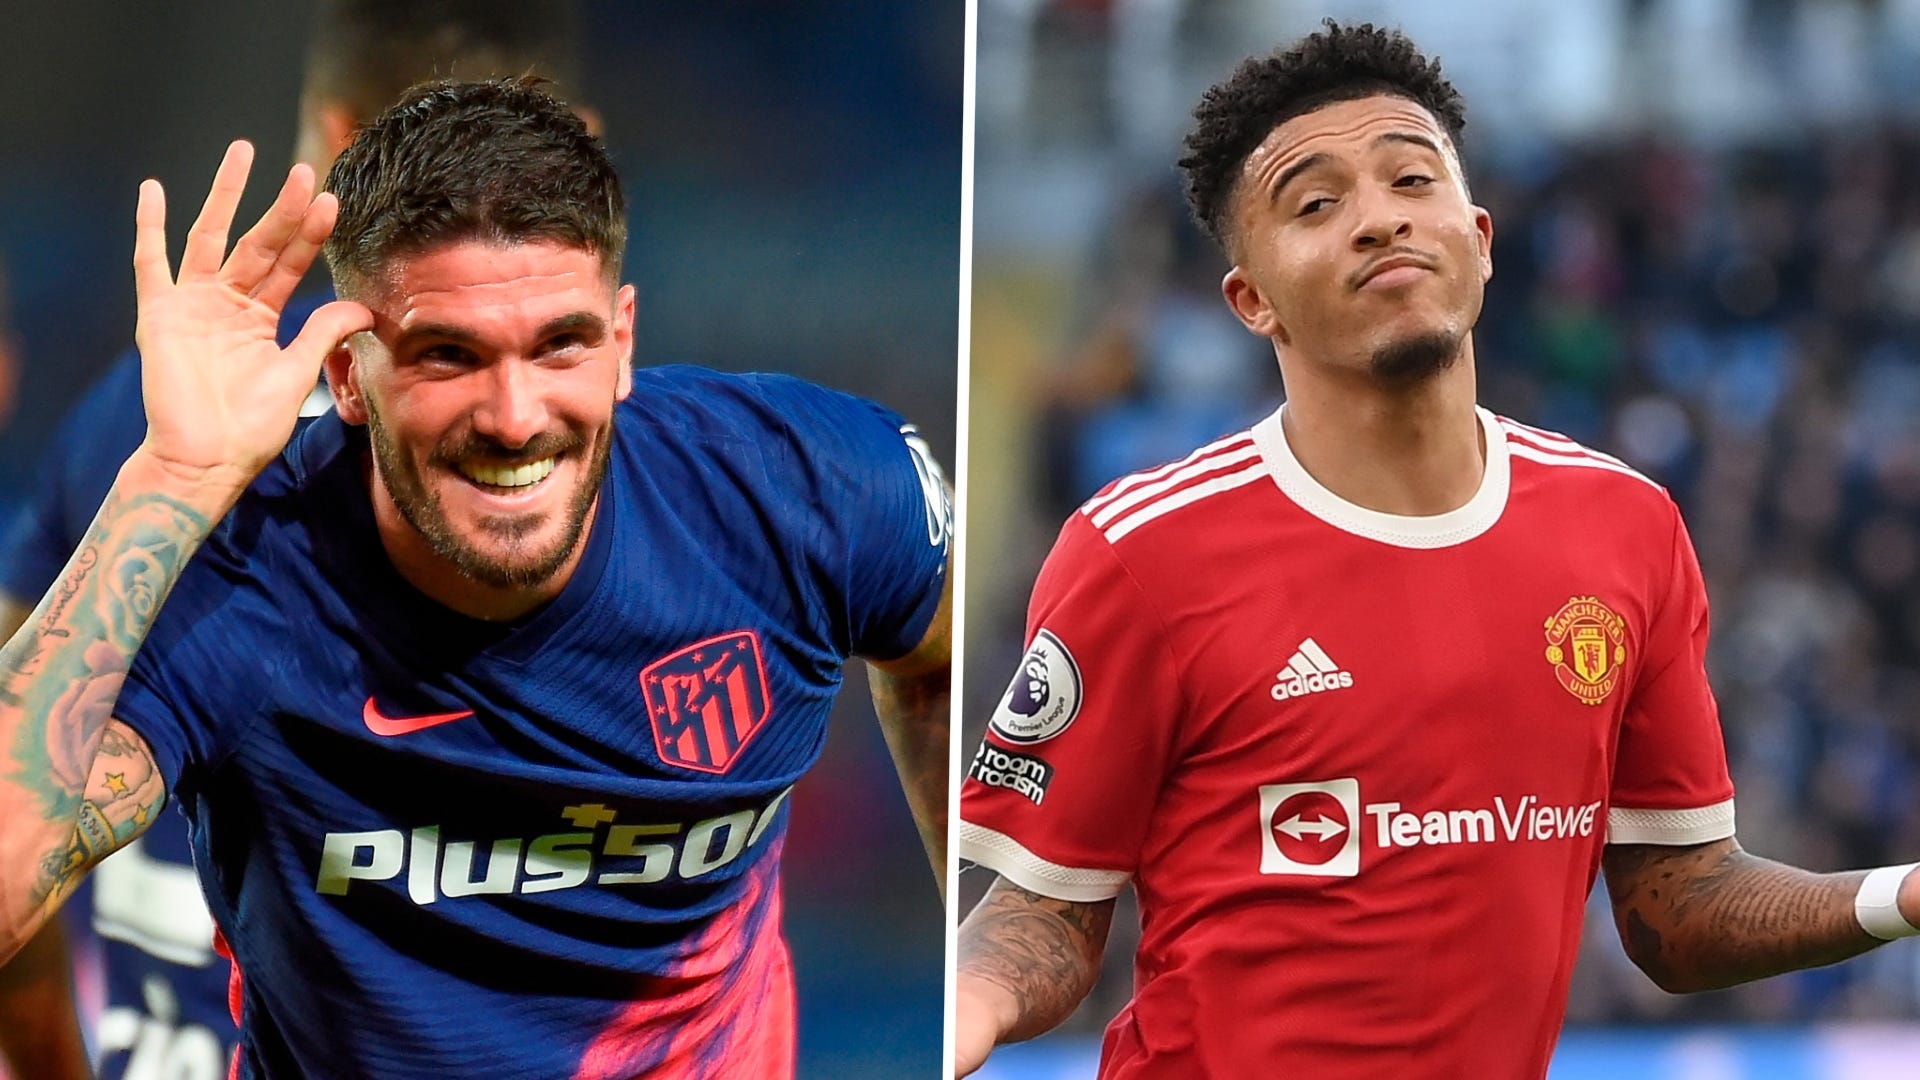 Man Utd vs Atletico Madrid Live stream, TV channel, kick-off time and how to watch Goal Ghana